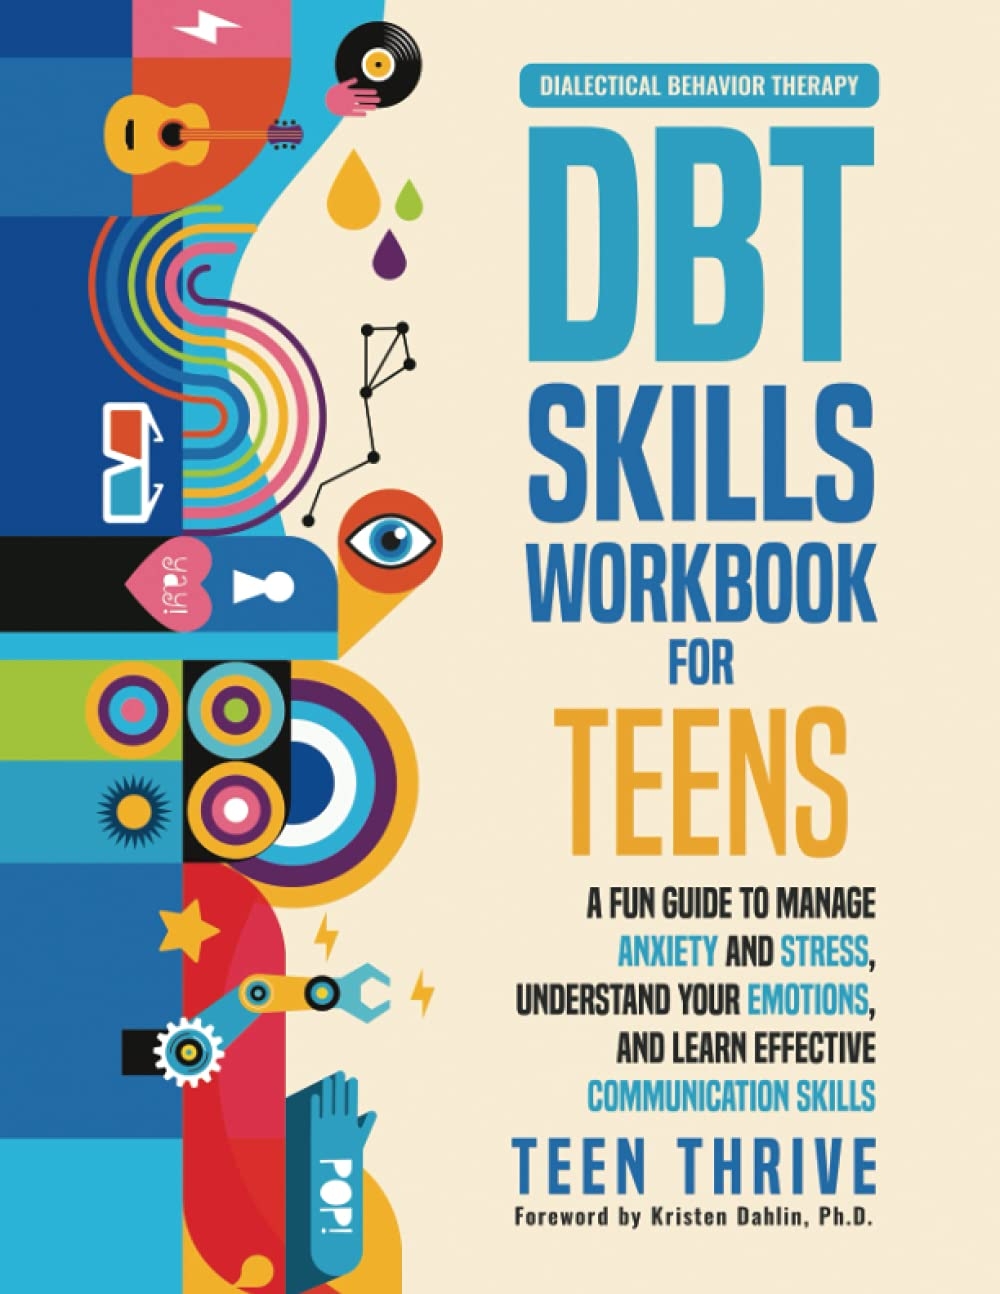 The DBT Skills Workbook For Teens A Fun Guide To Manage Anxiety And Stress Understand Your Emotions And Learn Effective Communication Skills Life Health And Wellness Books For Teenagers Thrive 